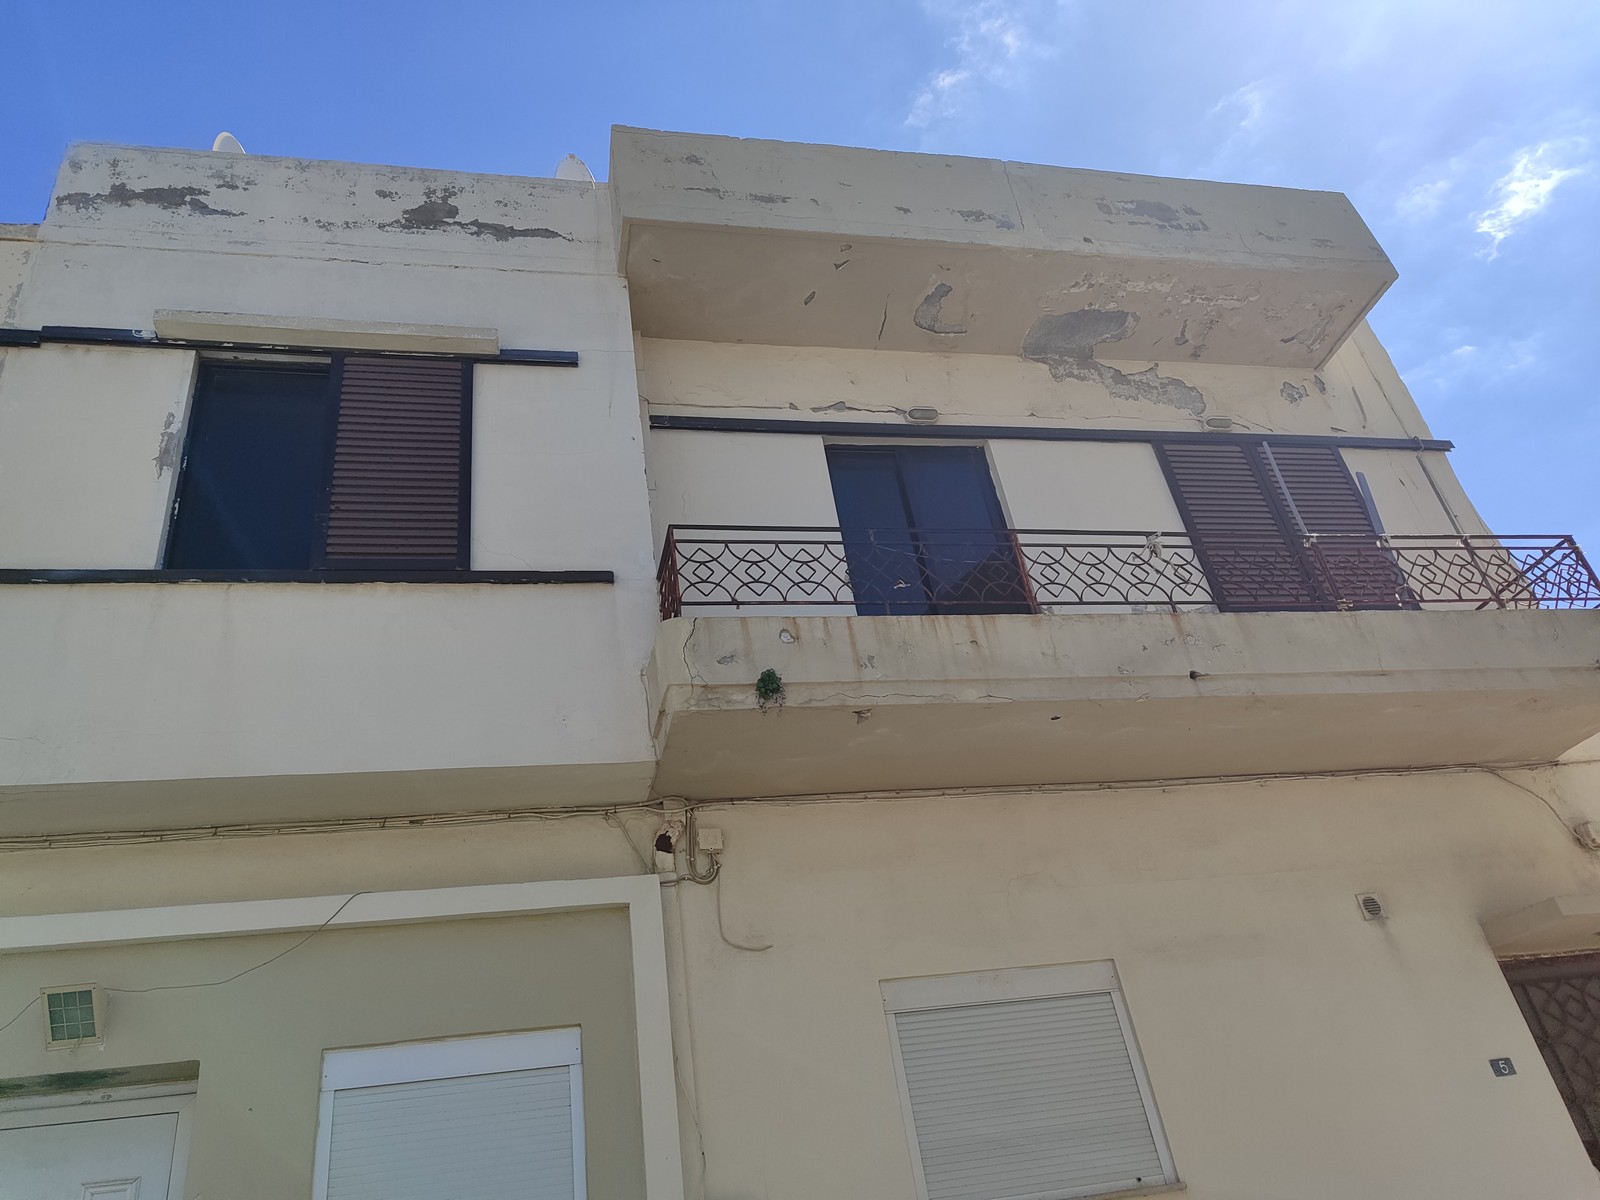 Maisonette for sale 110m2 almost in the city center of Heraklion.